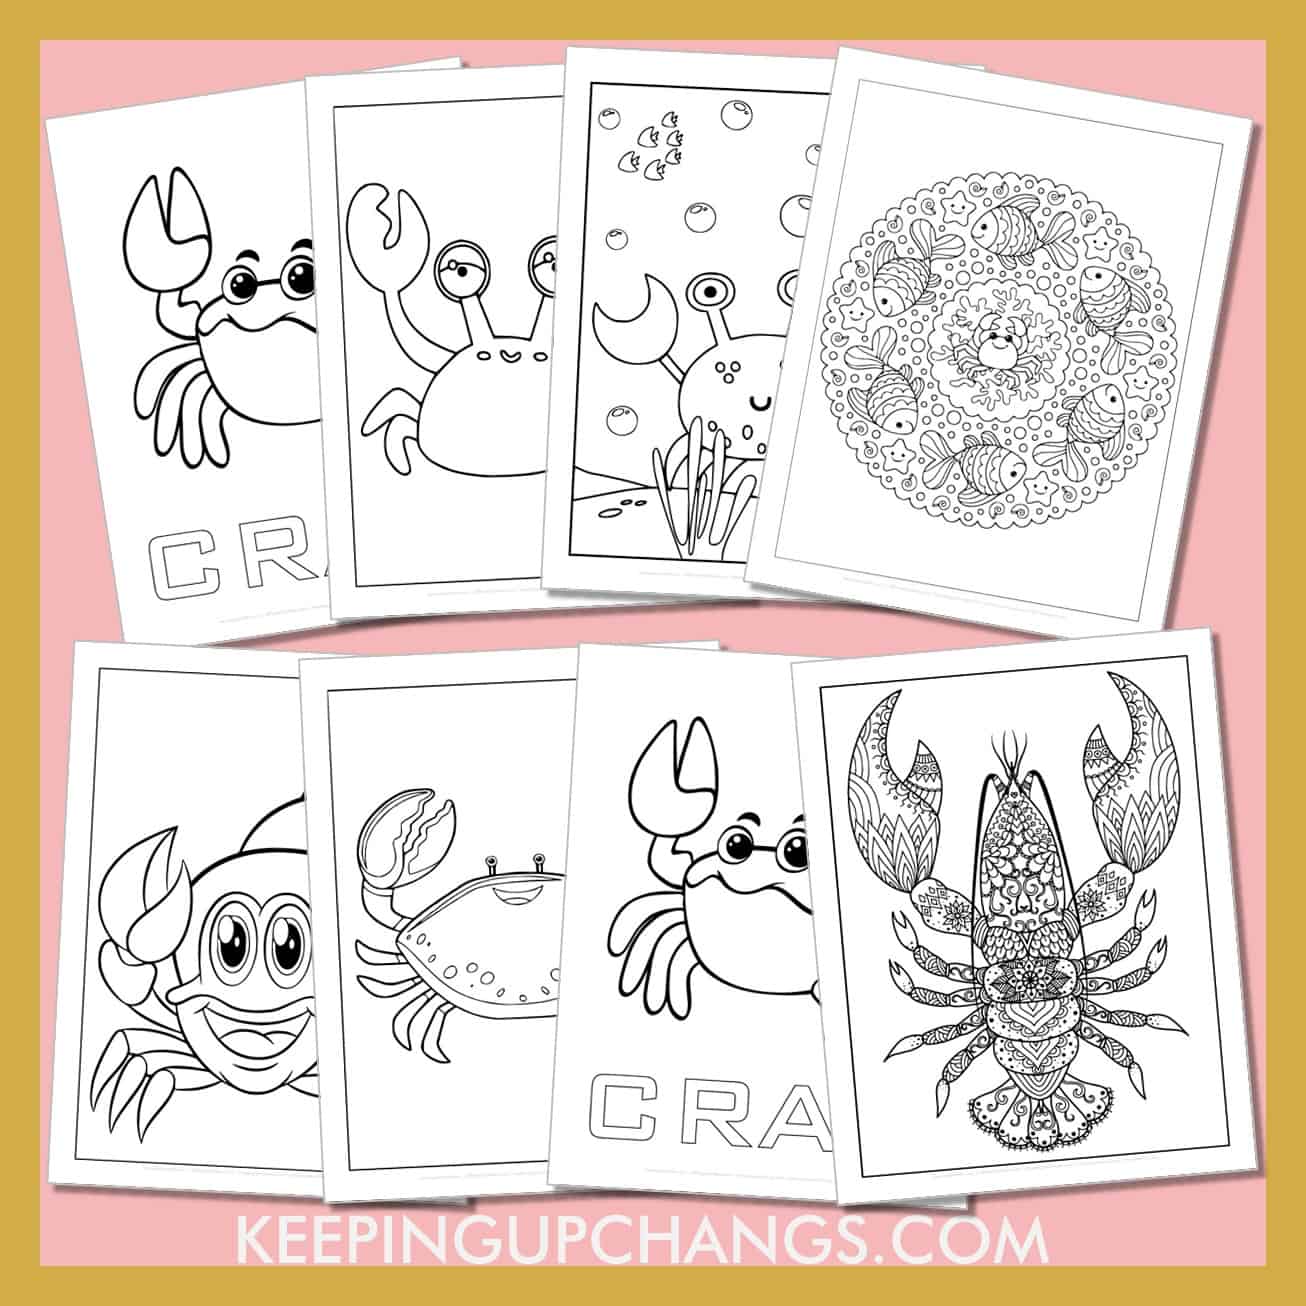 free crab, lobster pictures to color for toddlers, kids, adults.